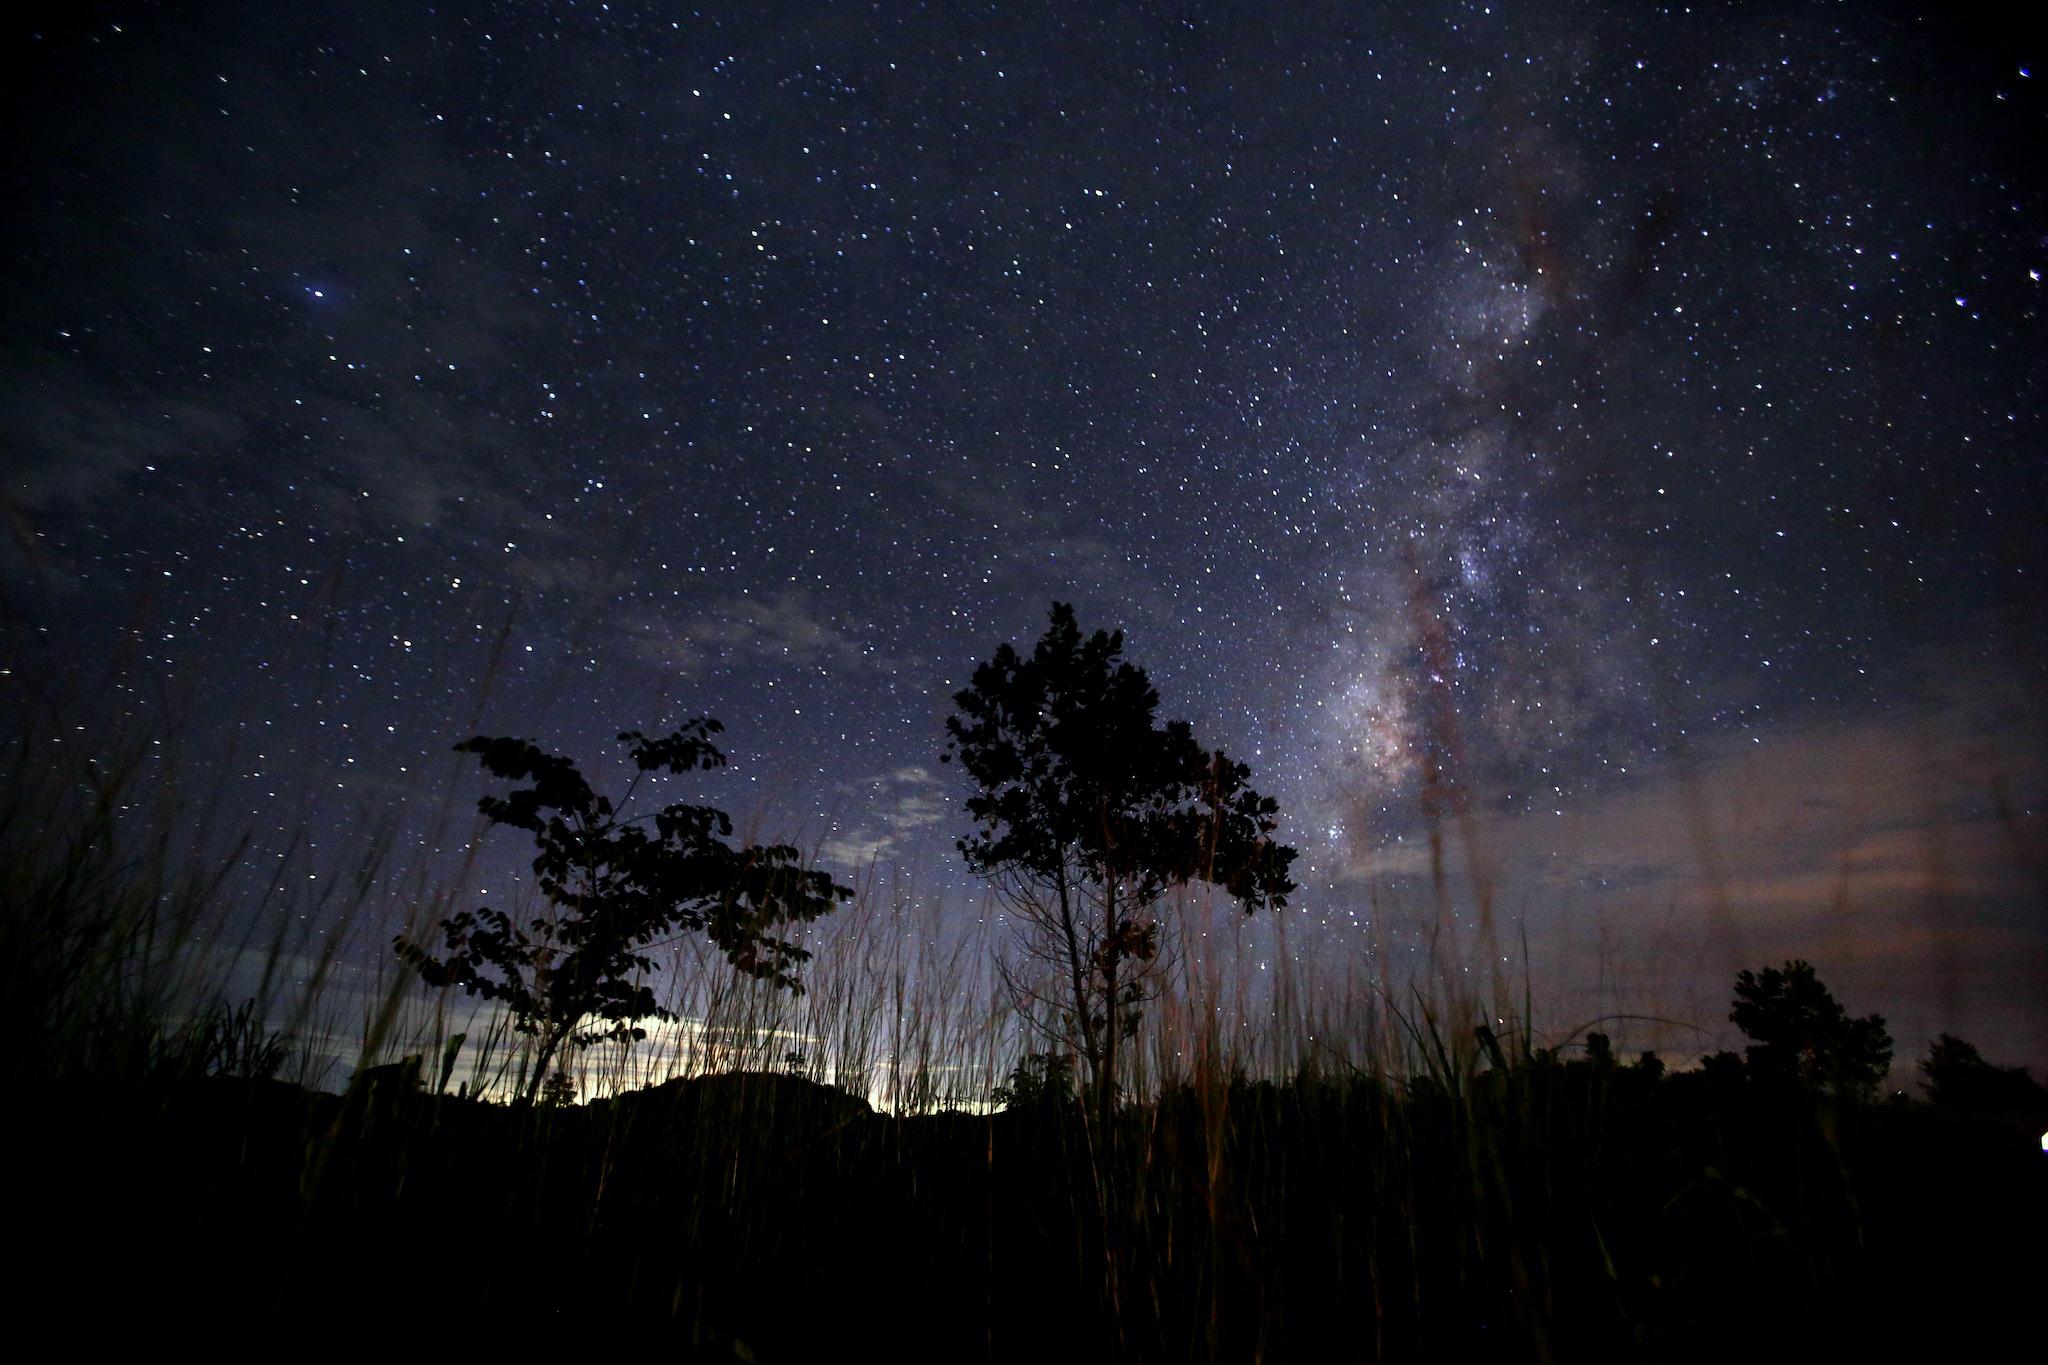 This long-exposure photograph taken on August 12, 2013 shows the Milky Way in the clear night sky near Yangon